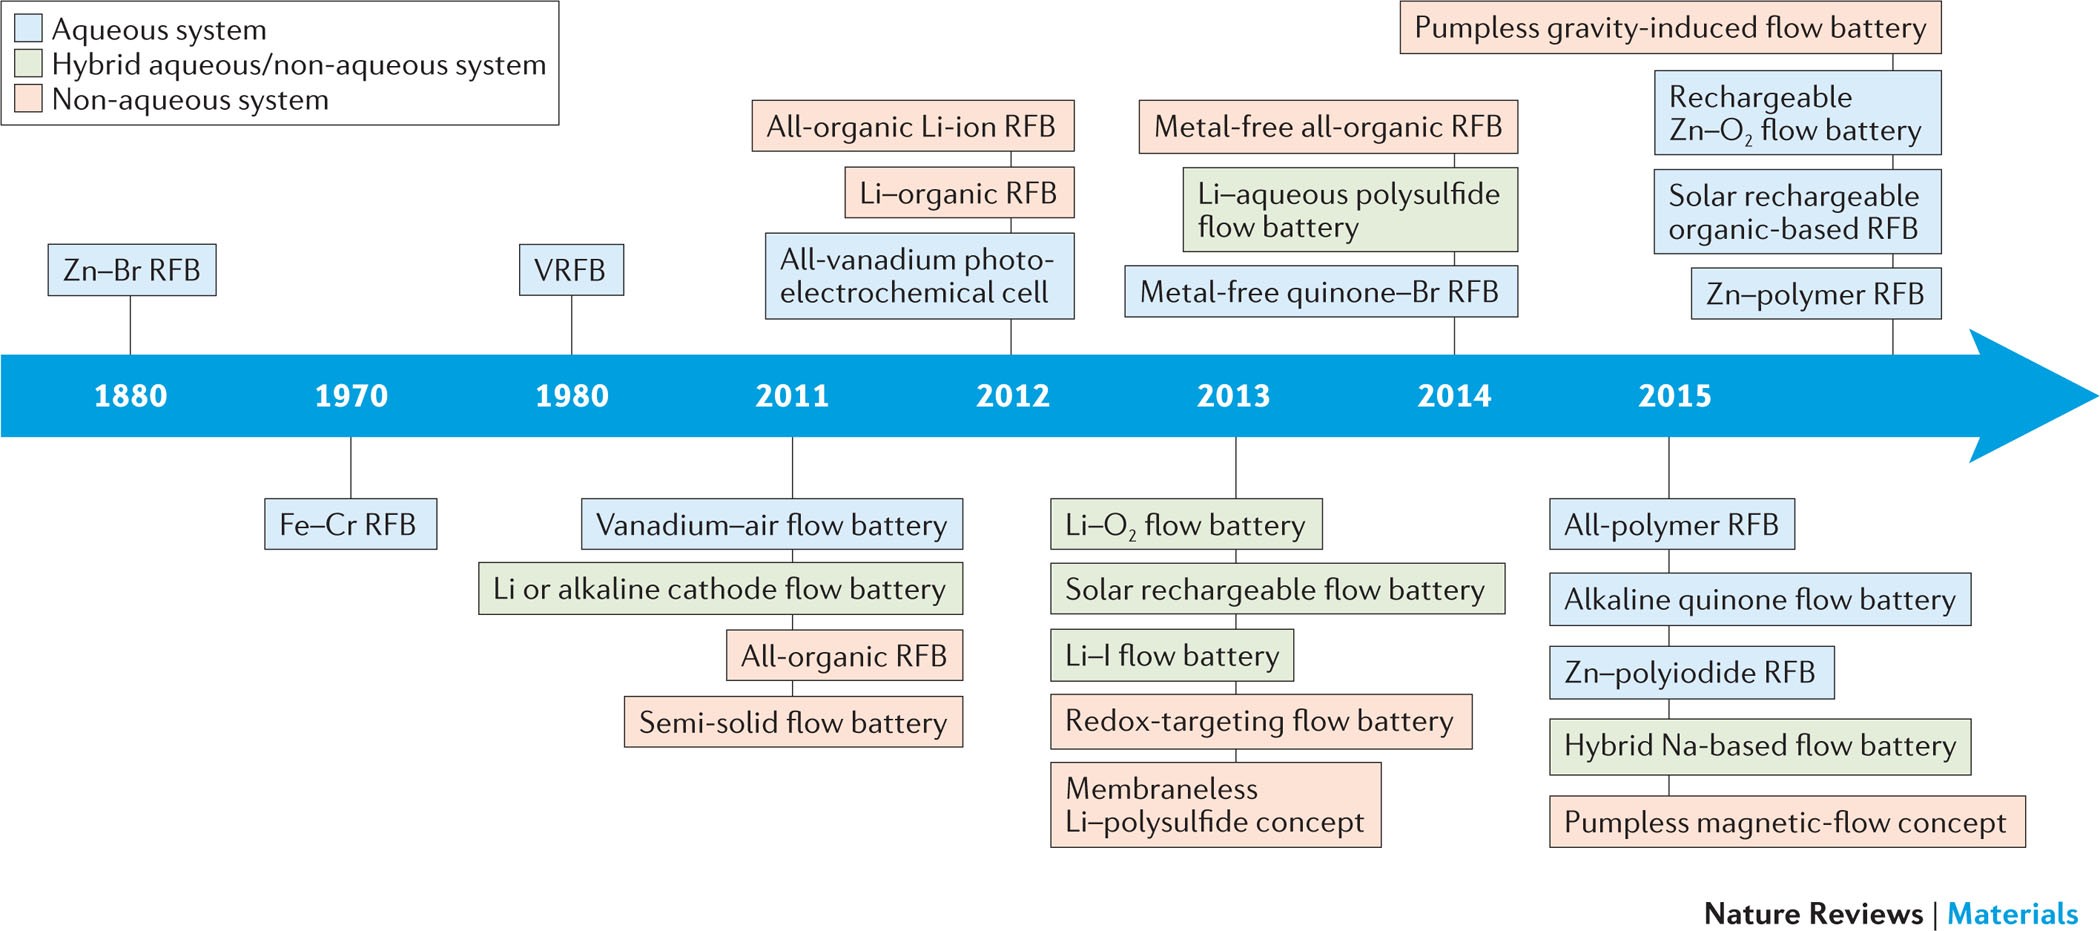 Material design and engineering of next-generation flow-battery  technologies | Nature Reviews Materials